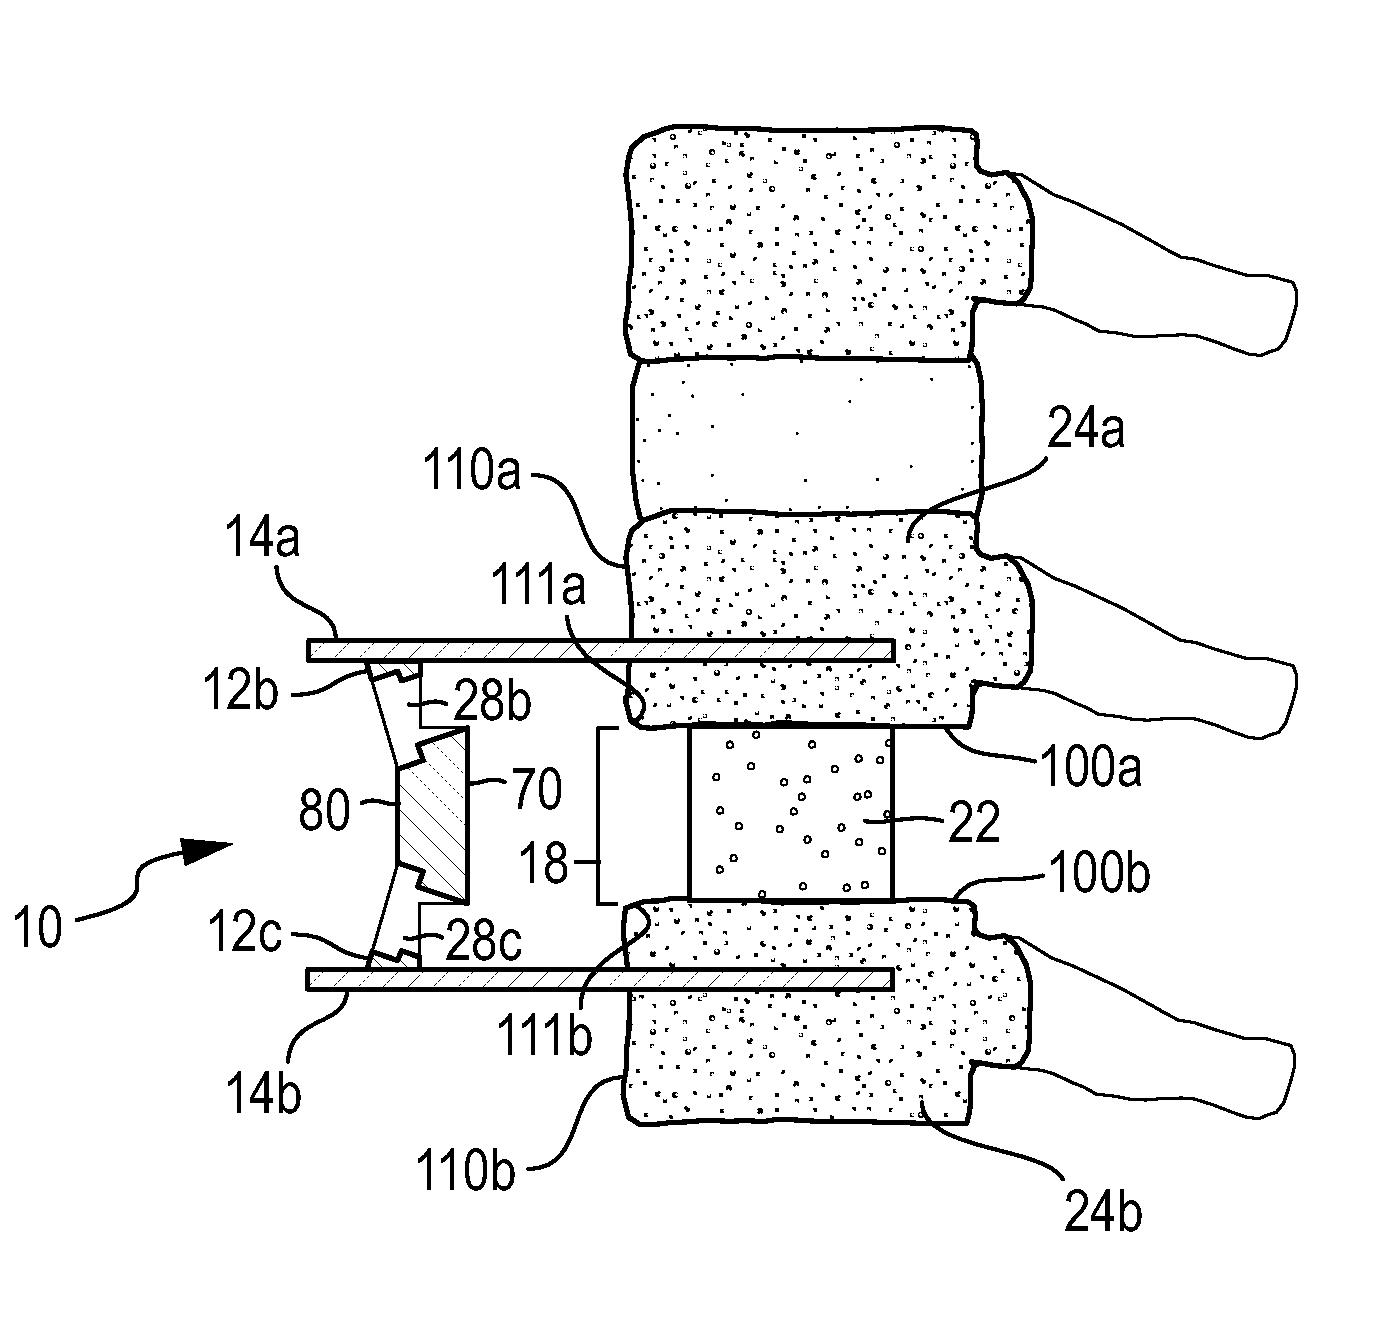 Low-profile anterior vertebral plate assemblies and methods of use